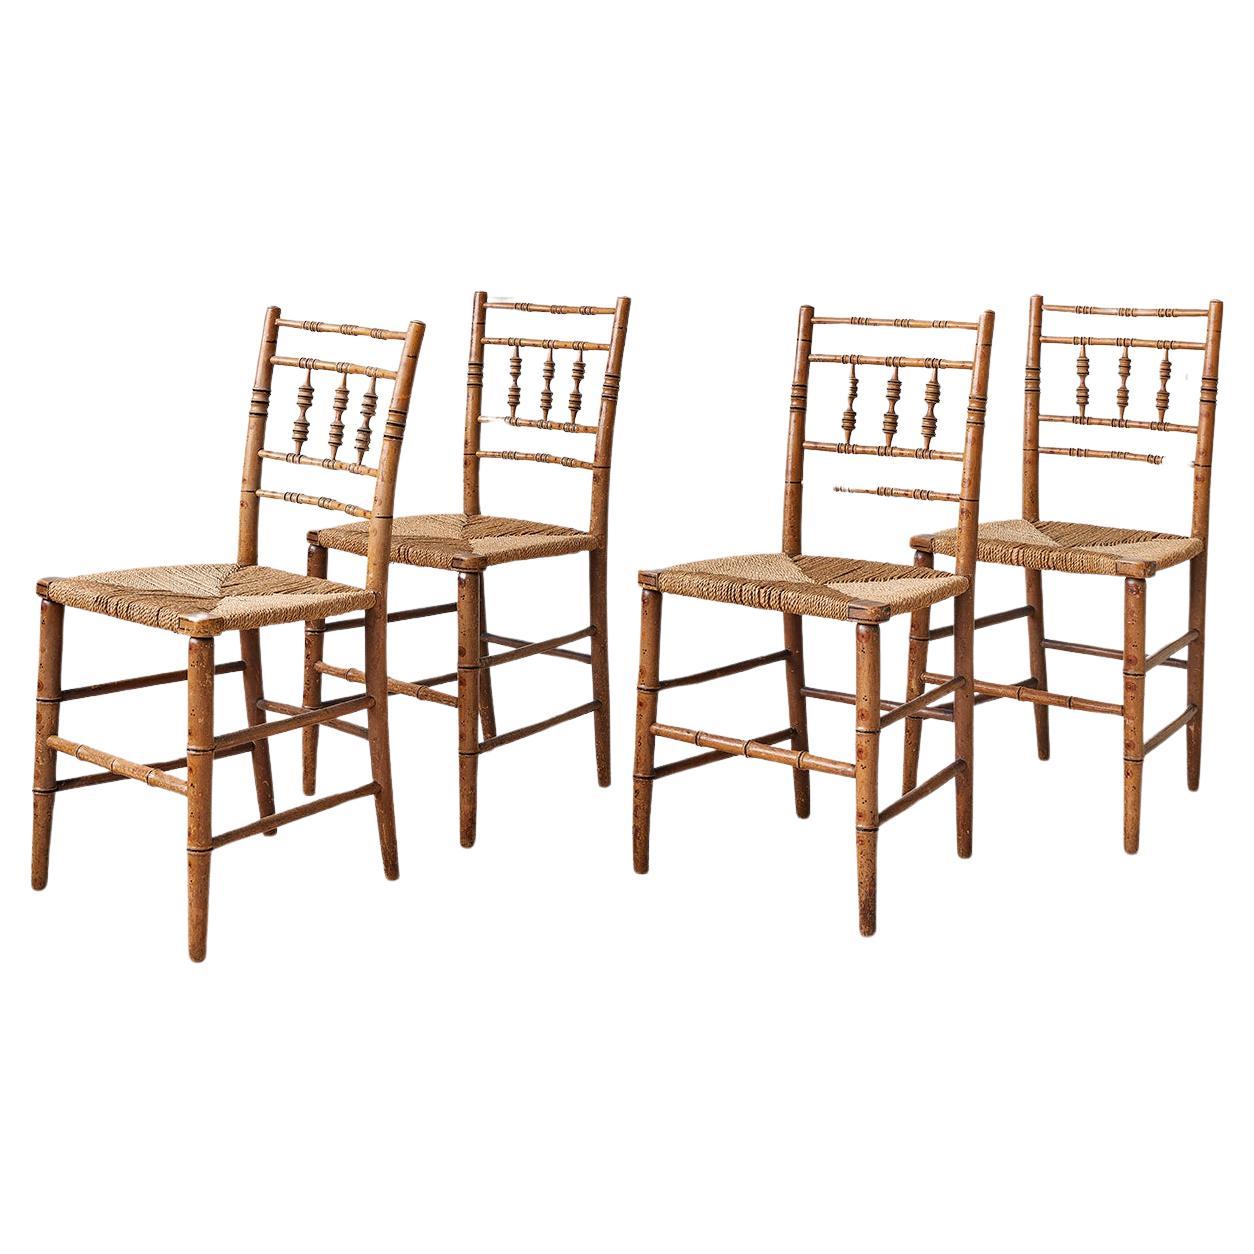 Antique Regency Faux Bamboo Side Chairs, Set of 4, England, Early 19th Century